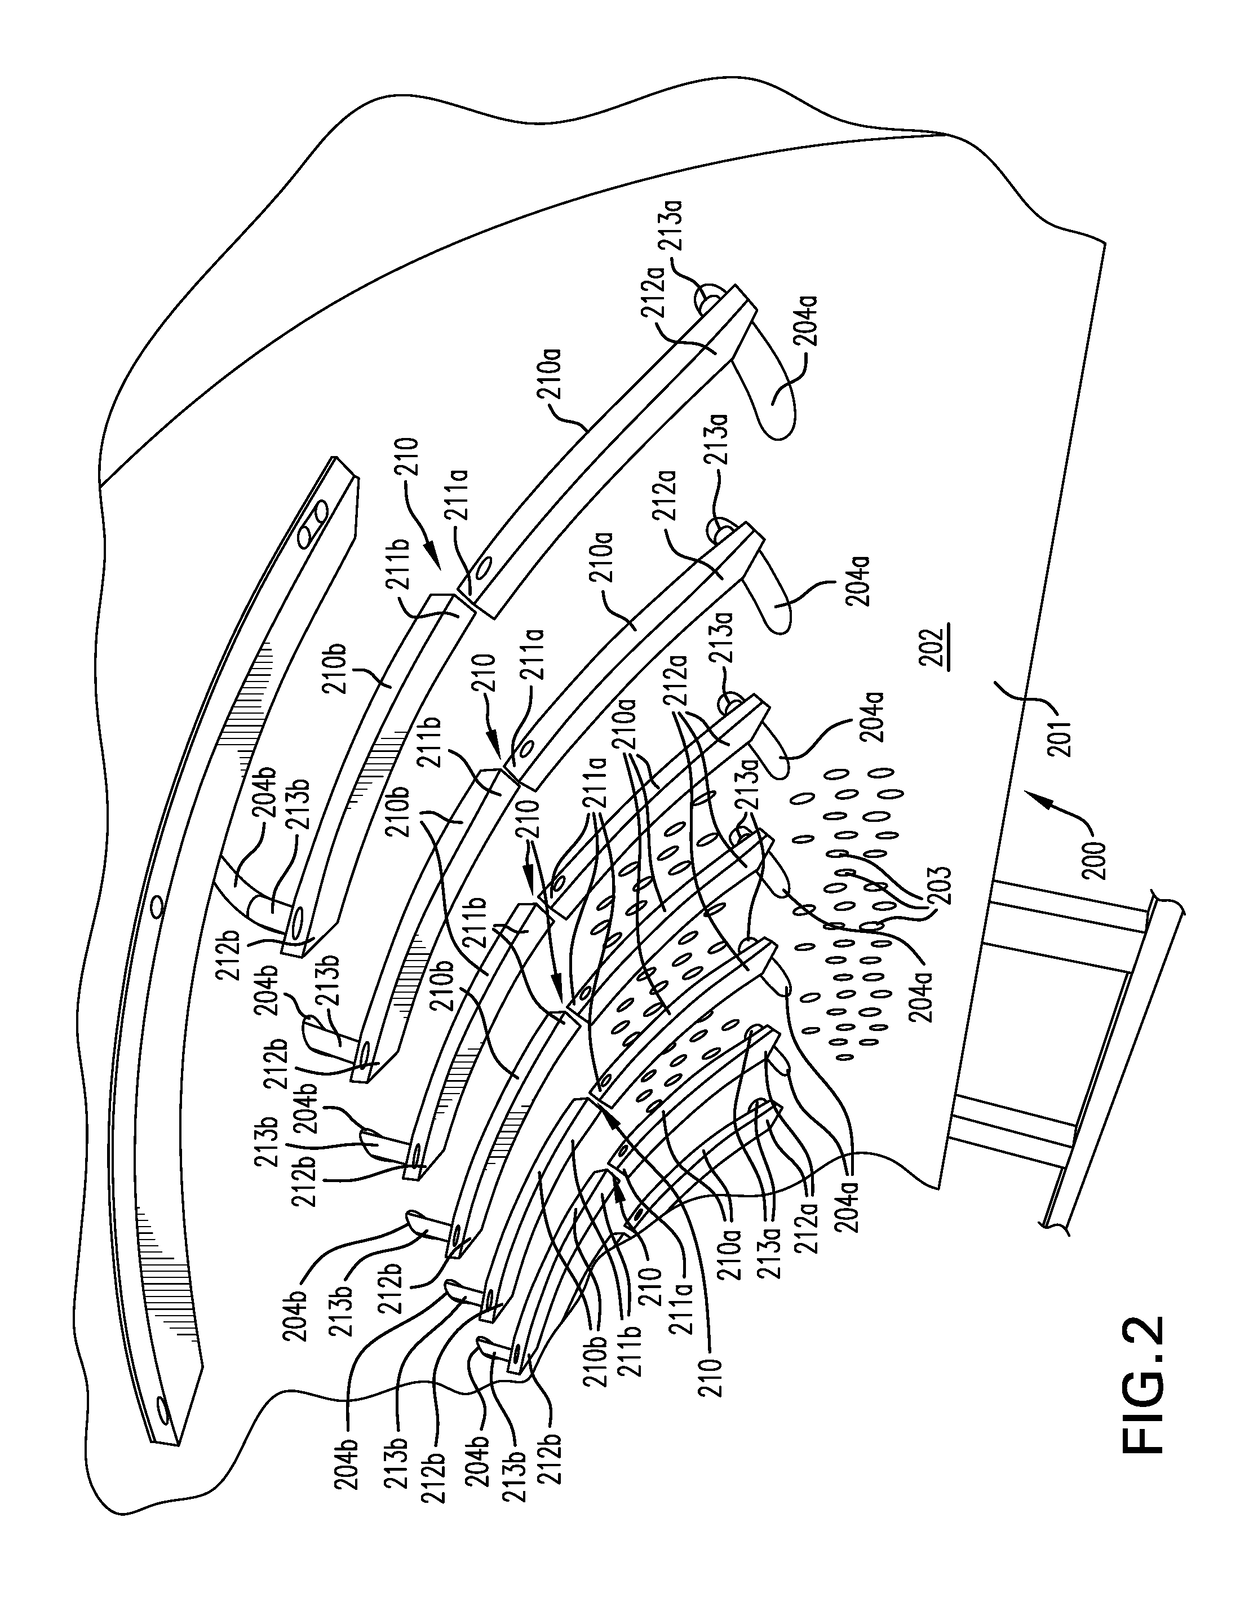 Threshing and separating system with adjustable rotor vanes